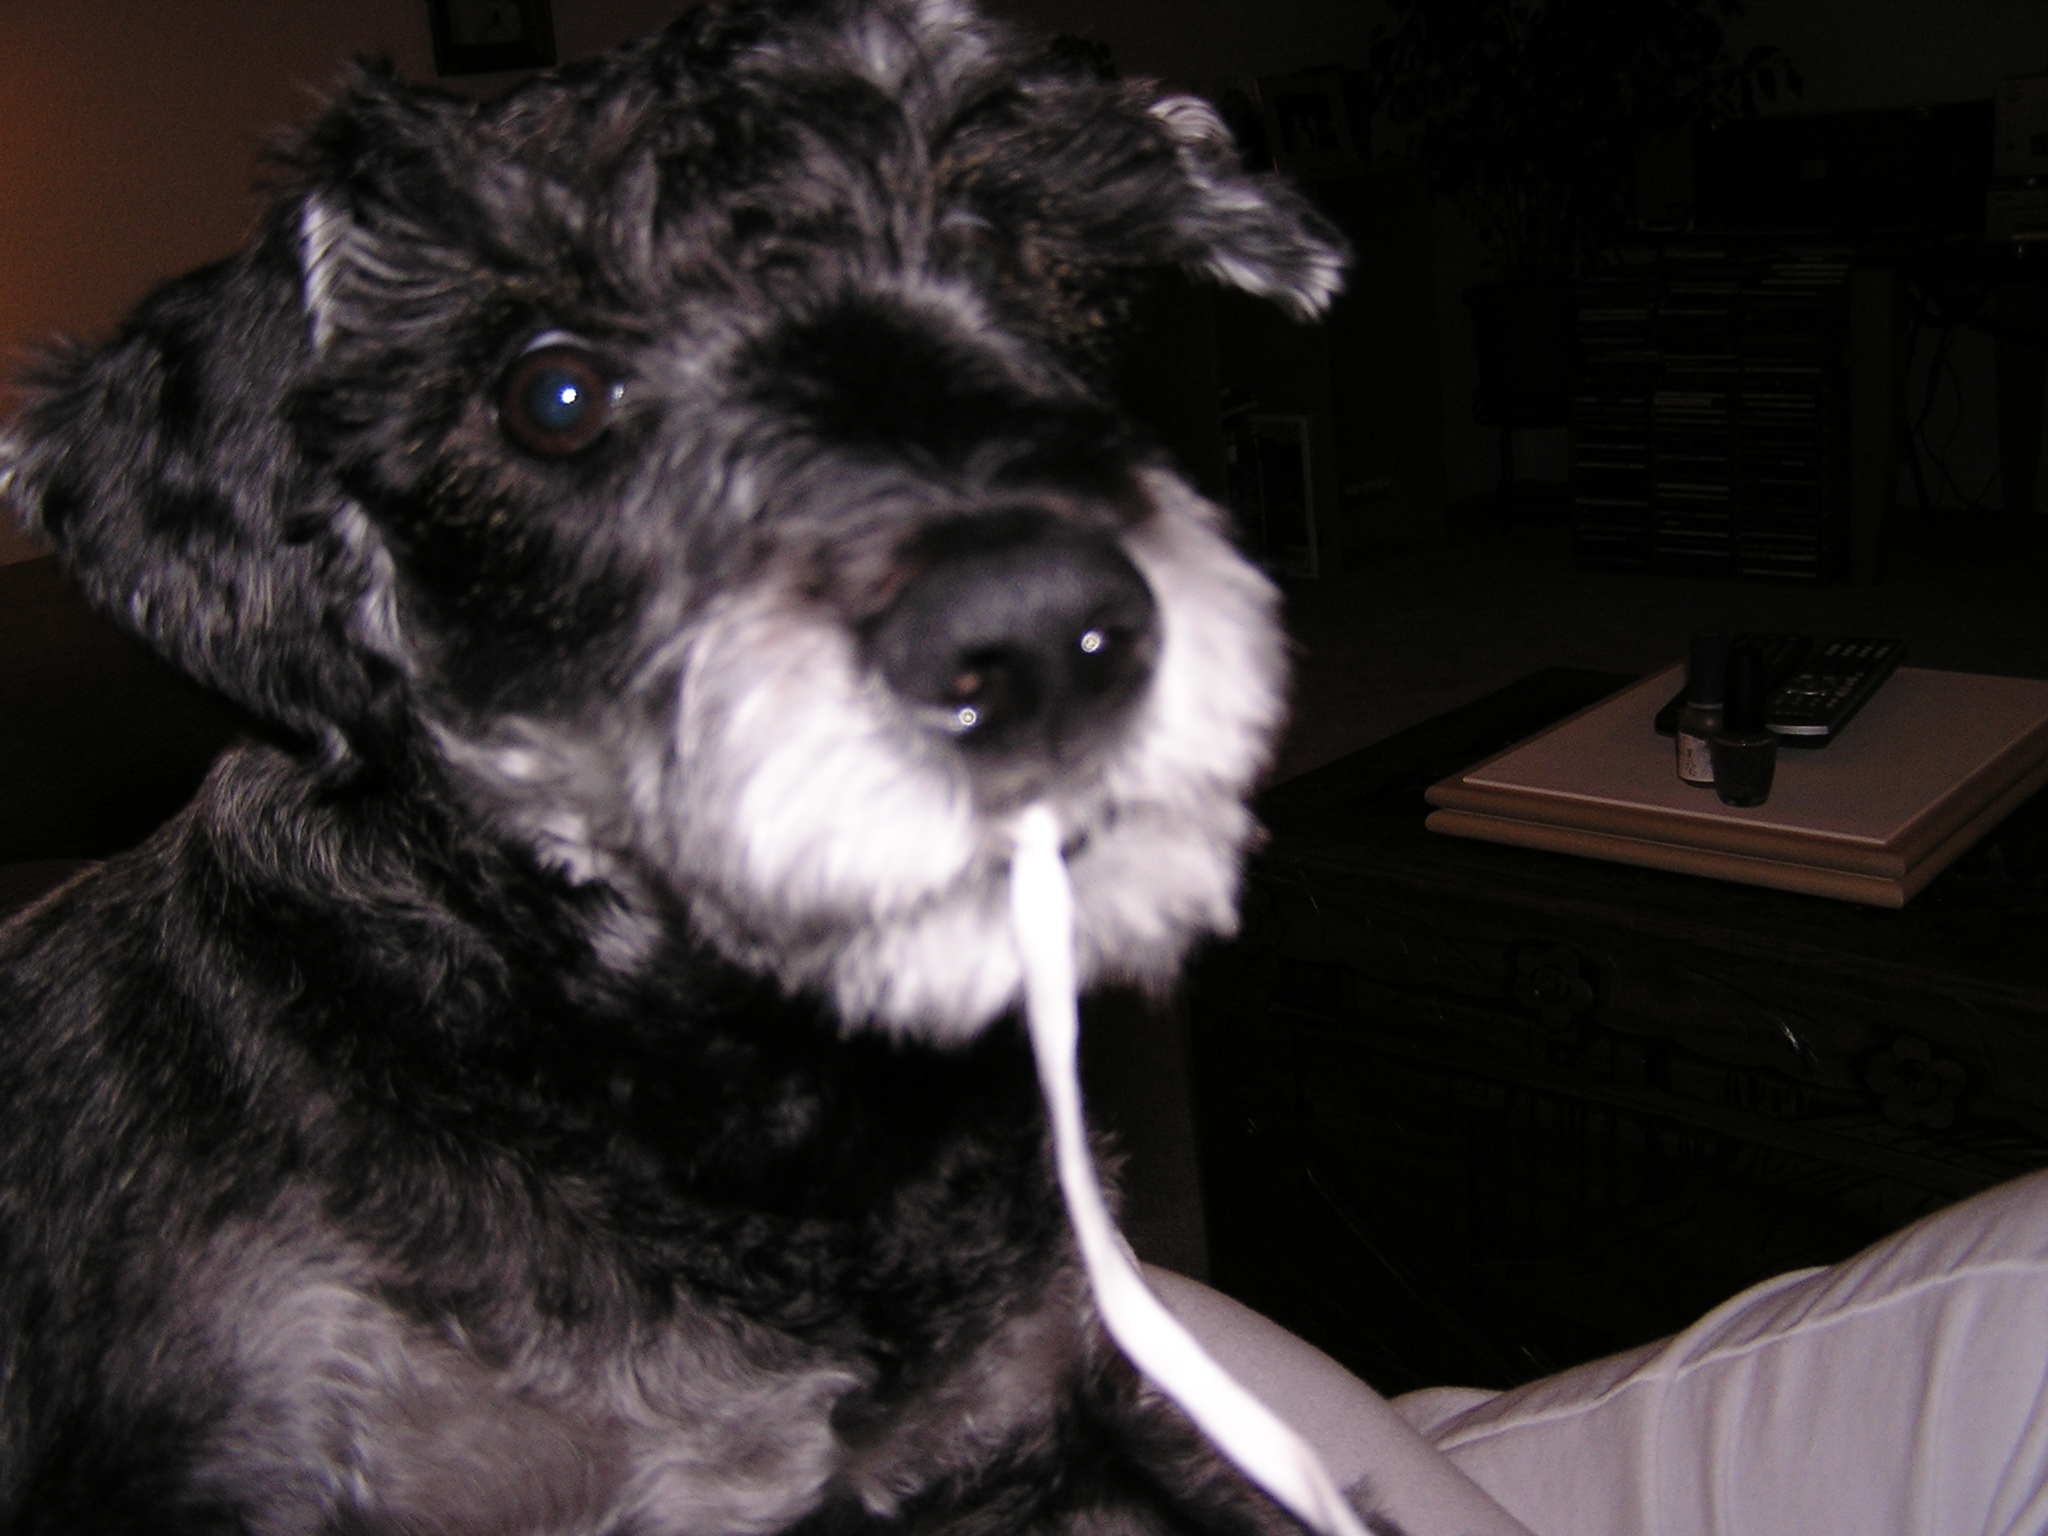 Harley chewing on string